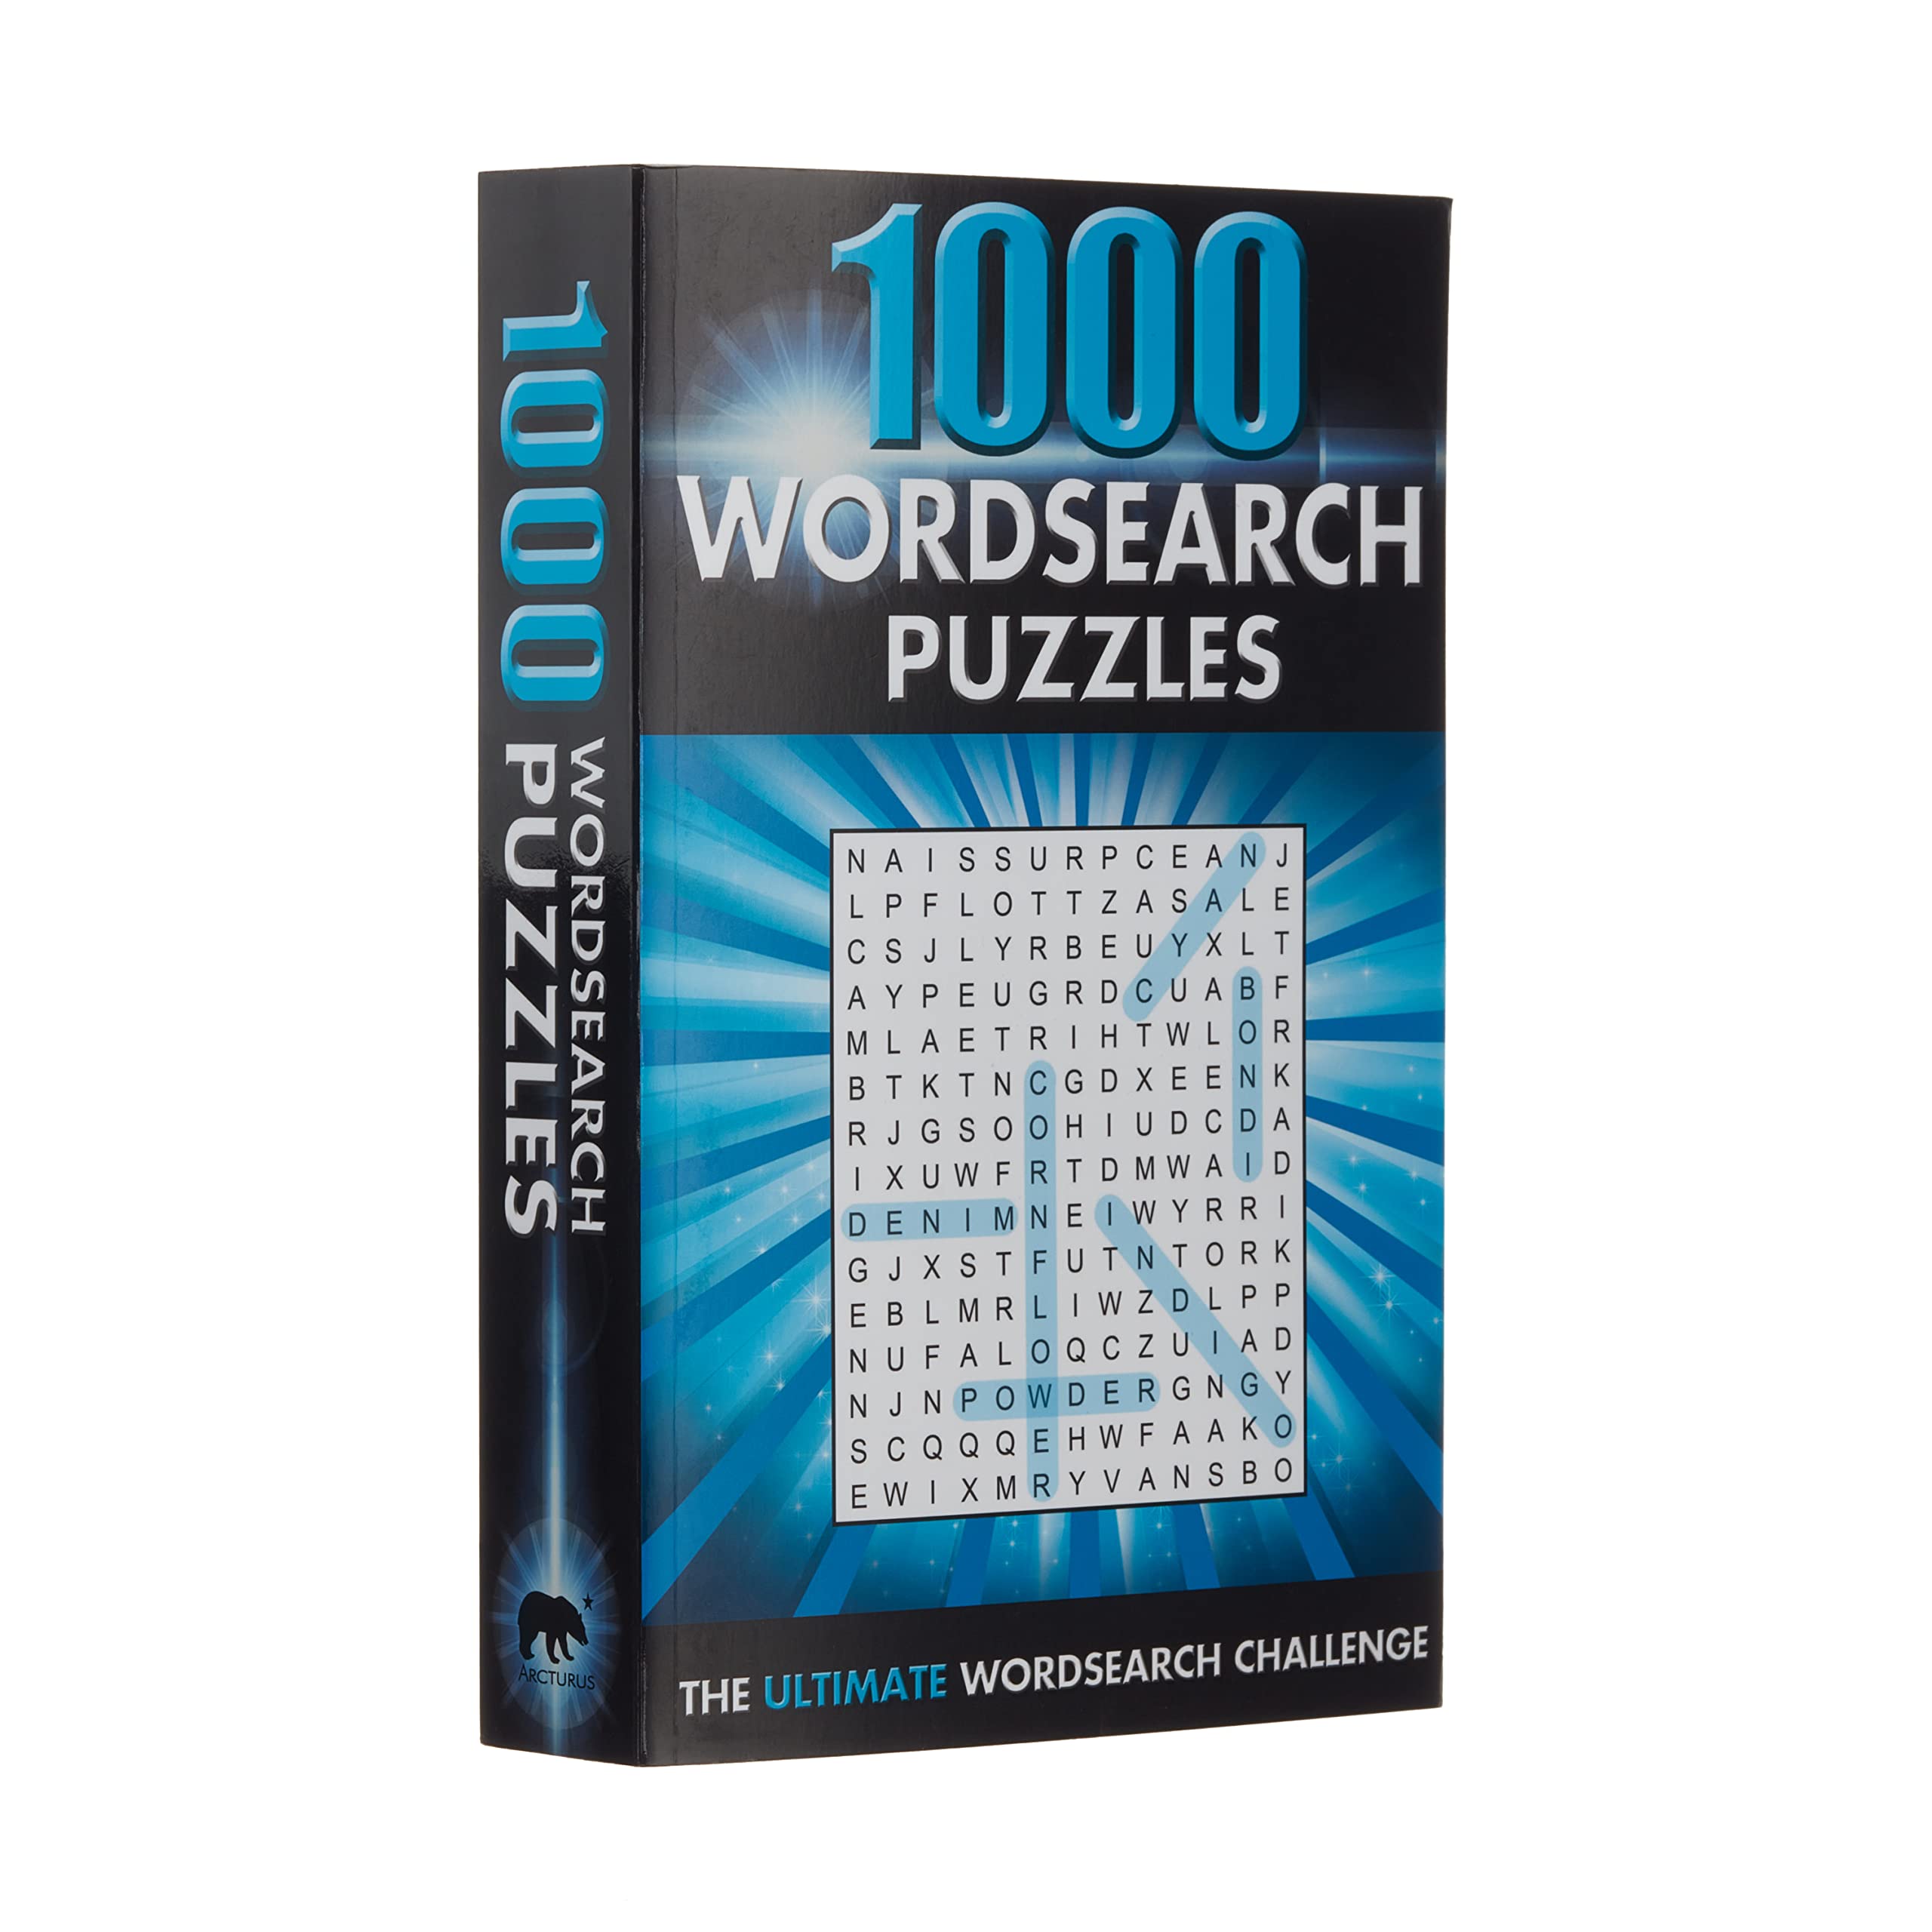 1000 Wordsearch Puzzles: The Ultimate Wordsearch Collection - SureShot Books Publishing LLC